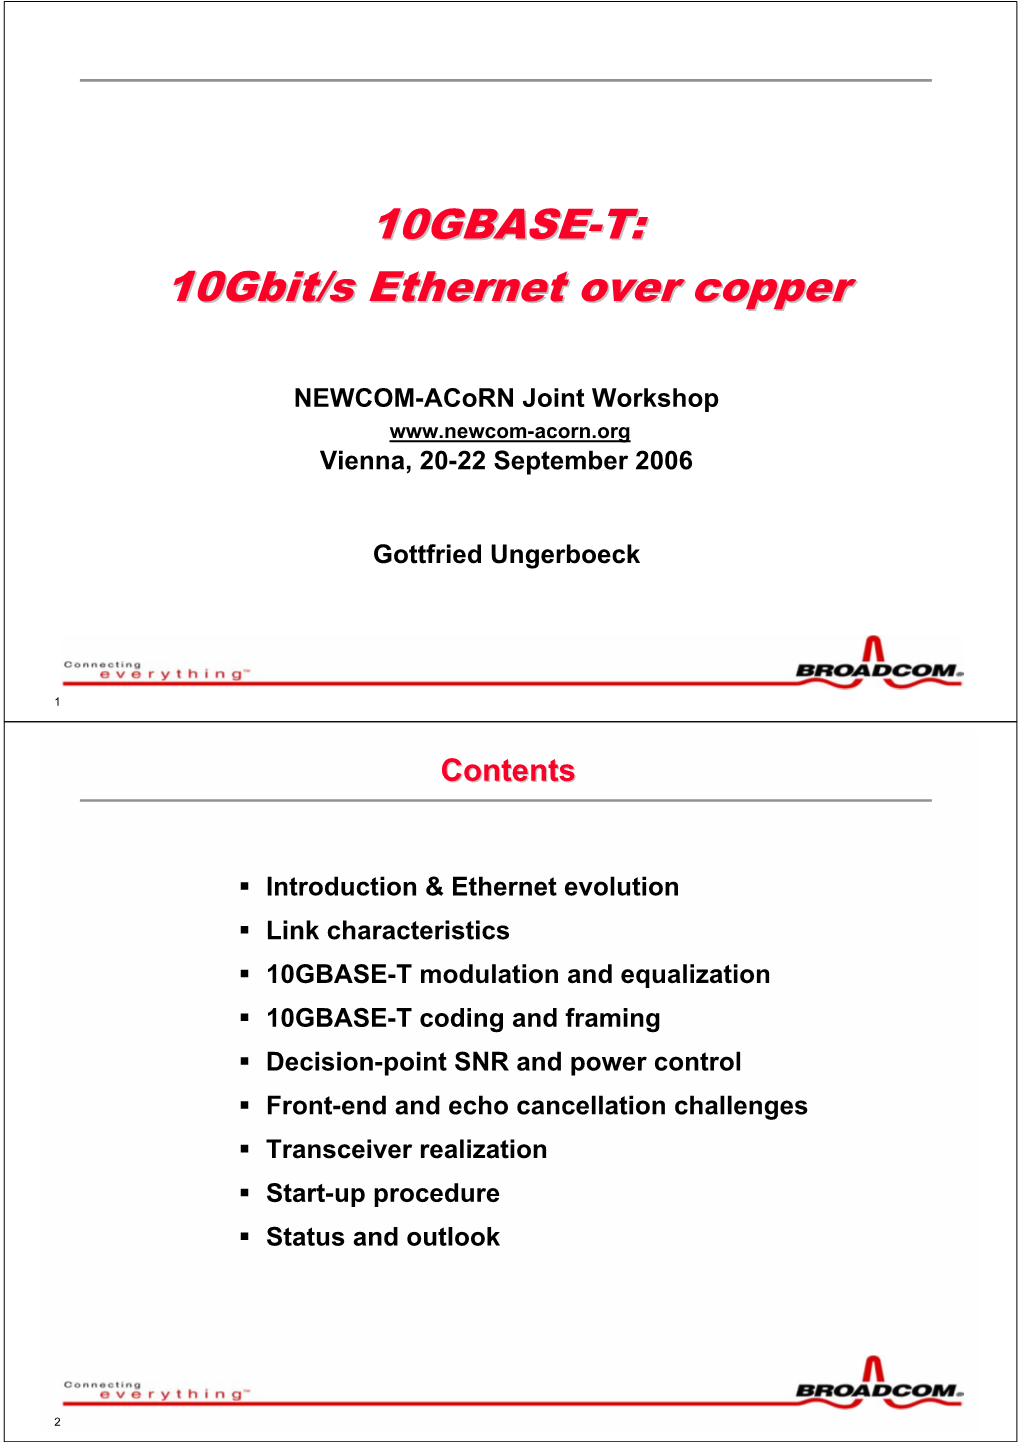 10GBASE-T: 10Gbit/S Ethernet Over Copper